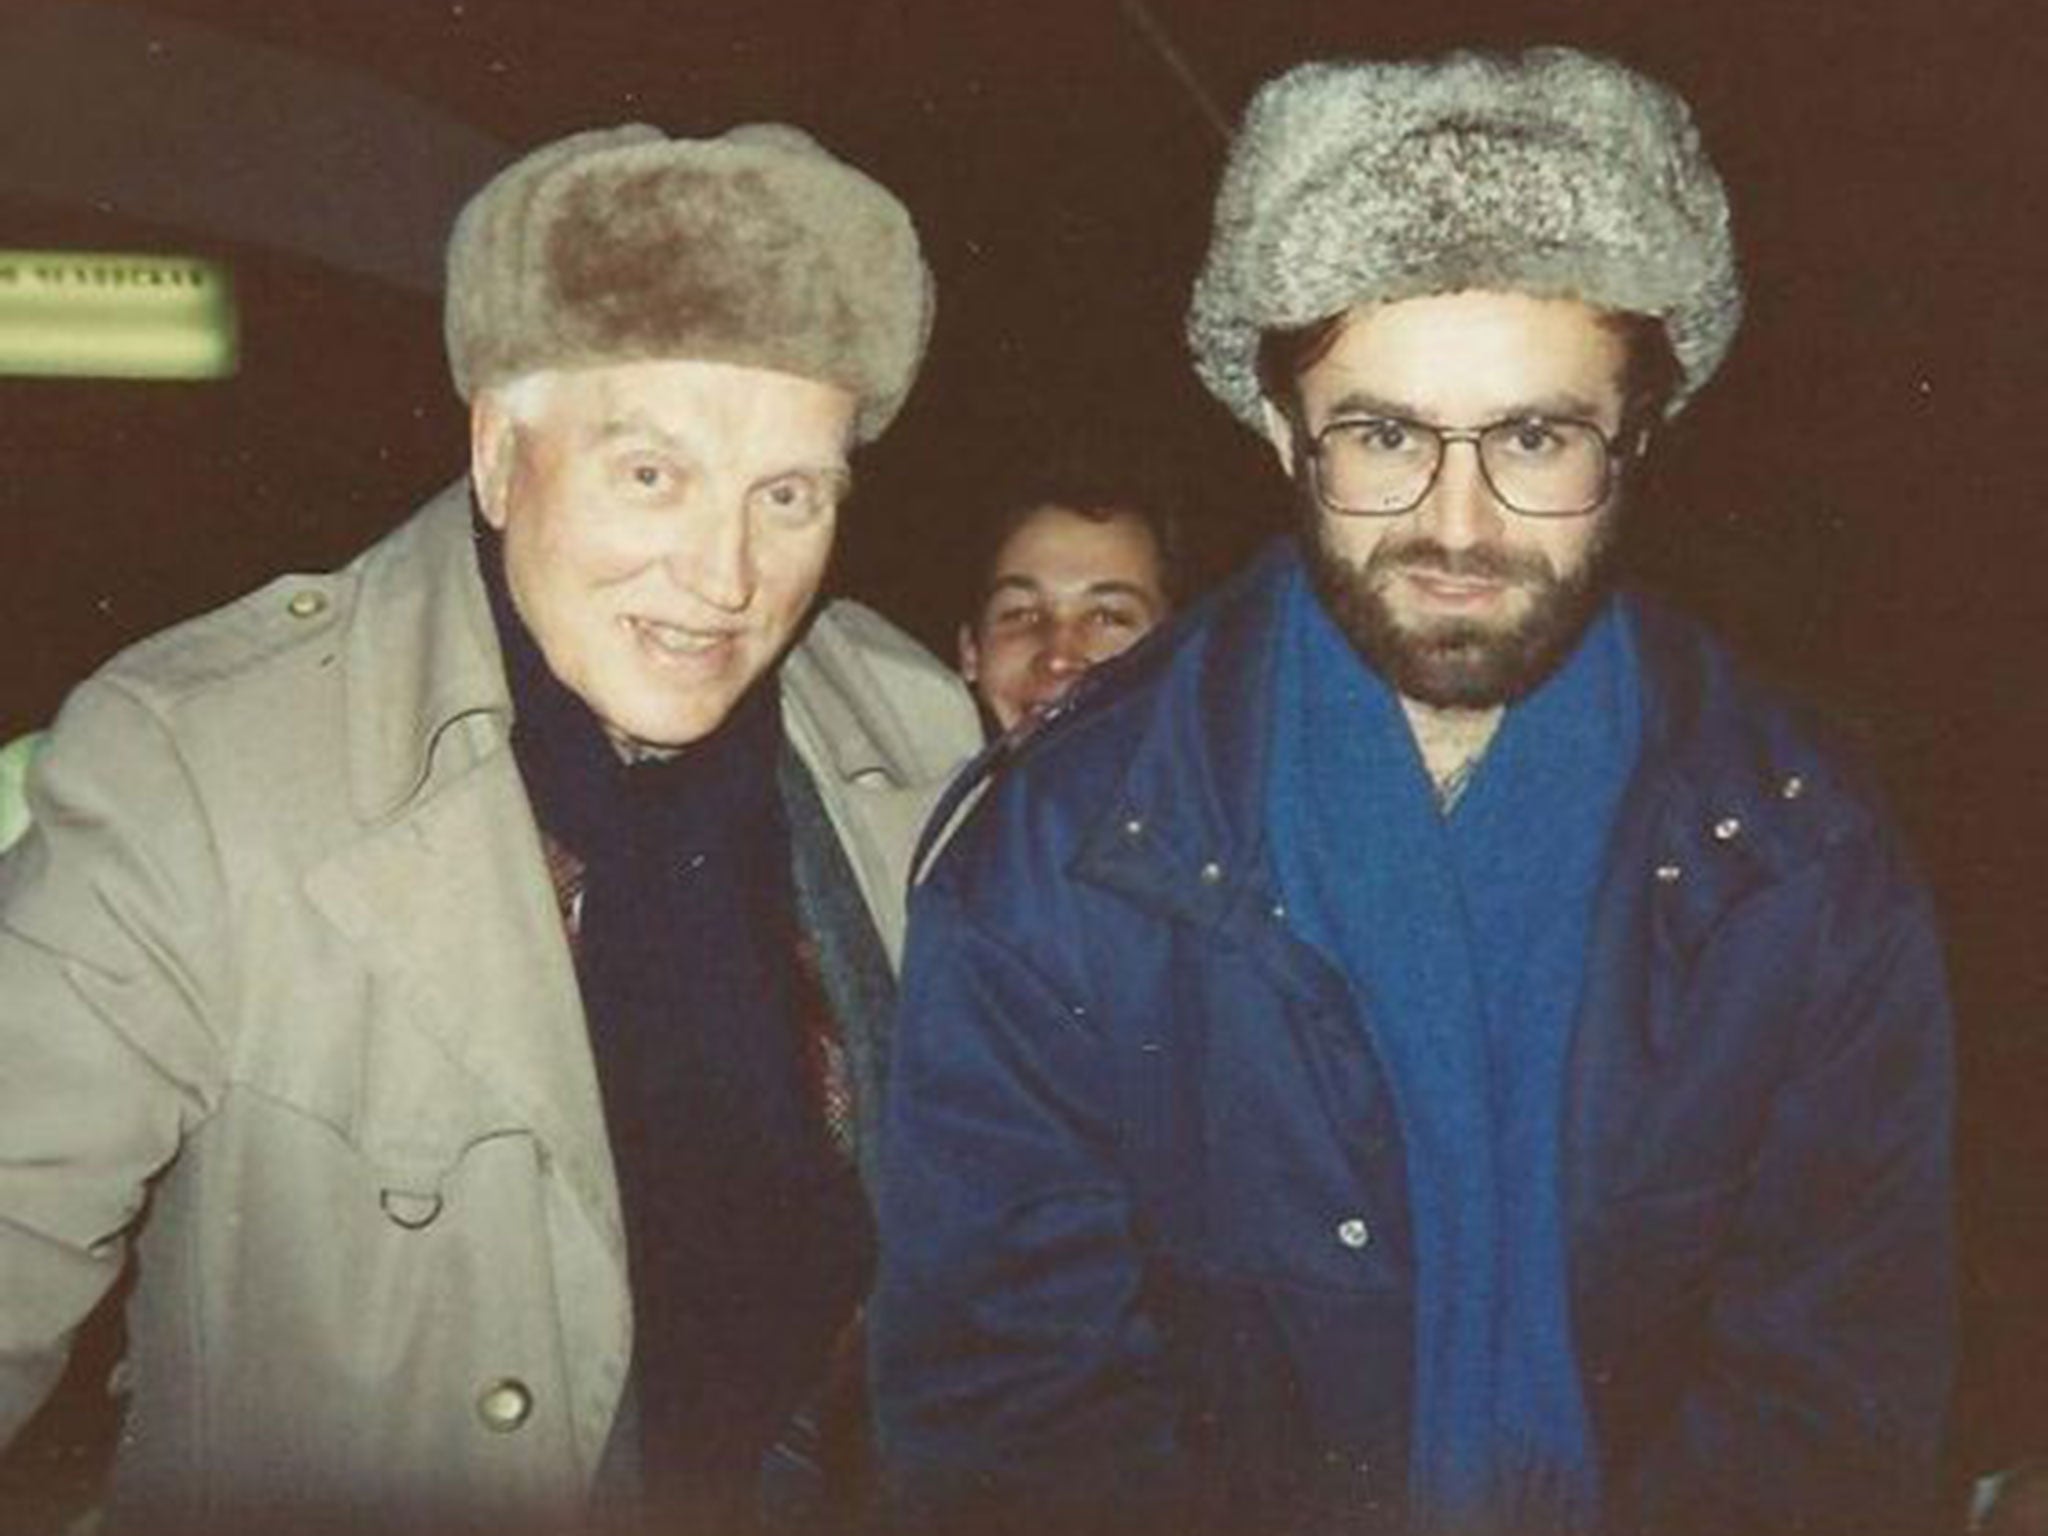 Mironov, right, in 1990 with the peace campaigner and former Gestapo victim Leif Hovelsen